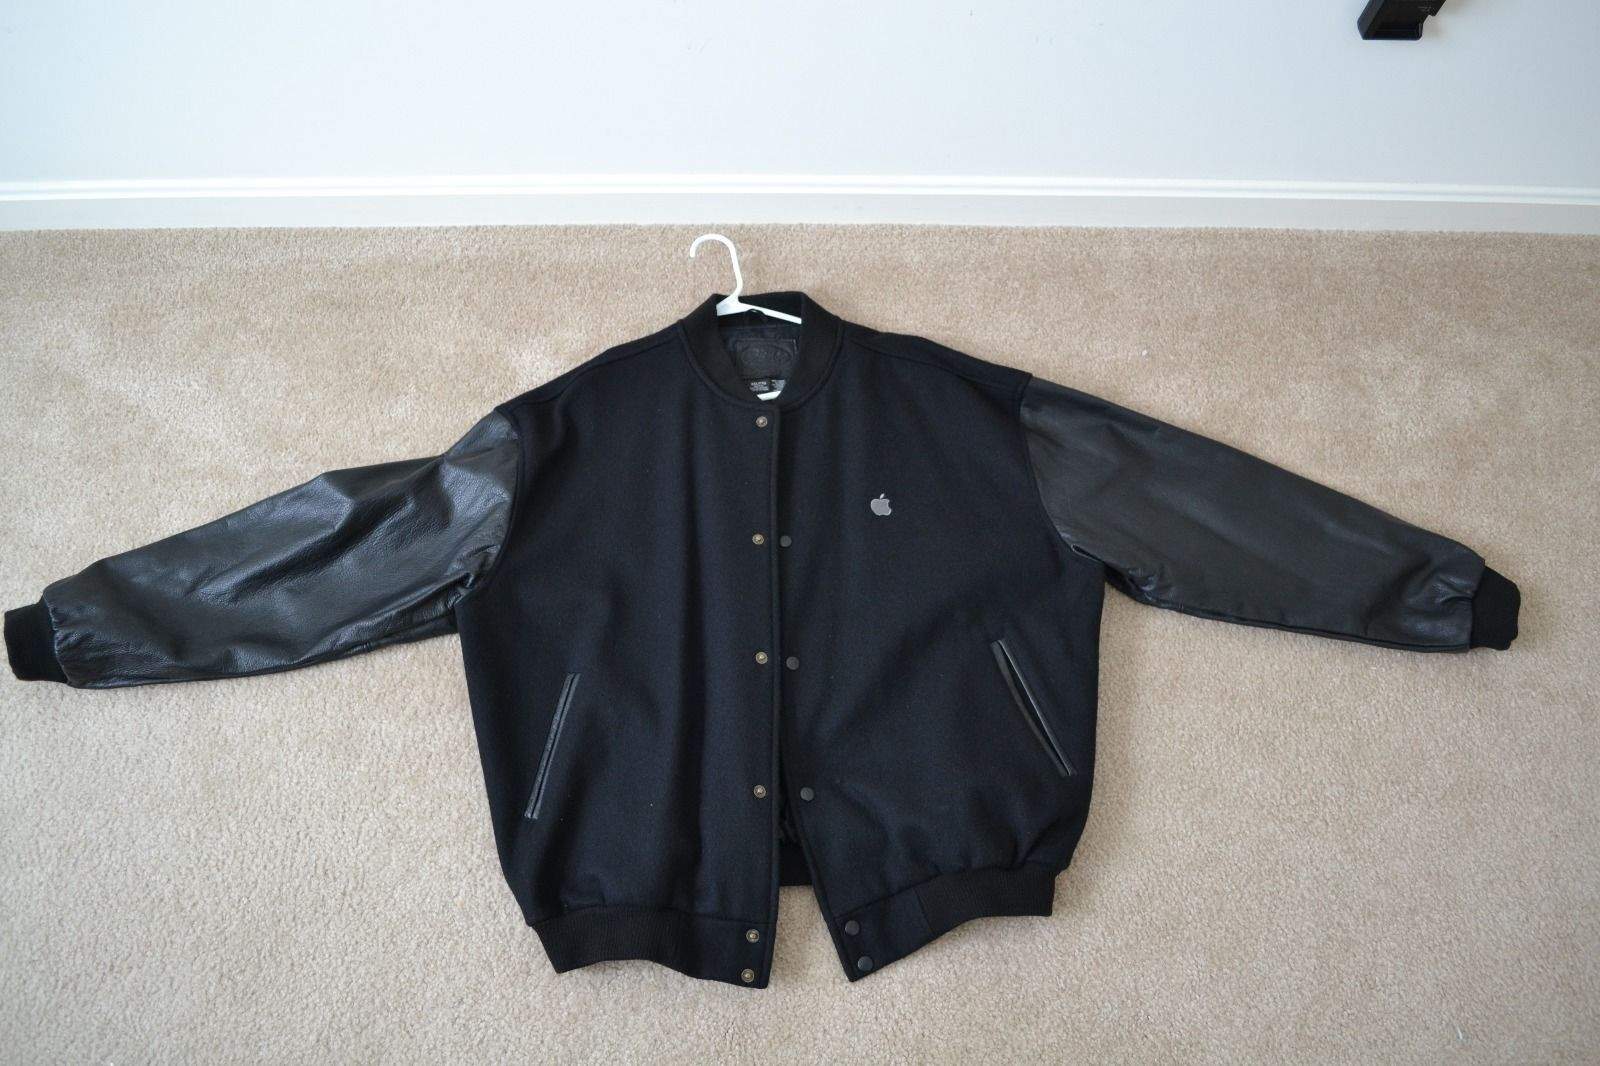 Want to look like Drake? eBay has your vintage Apple jacket